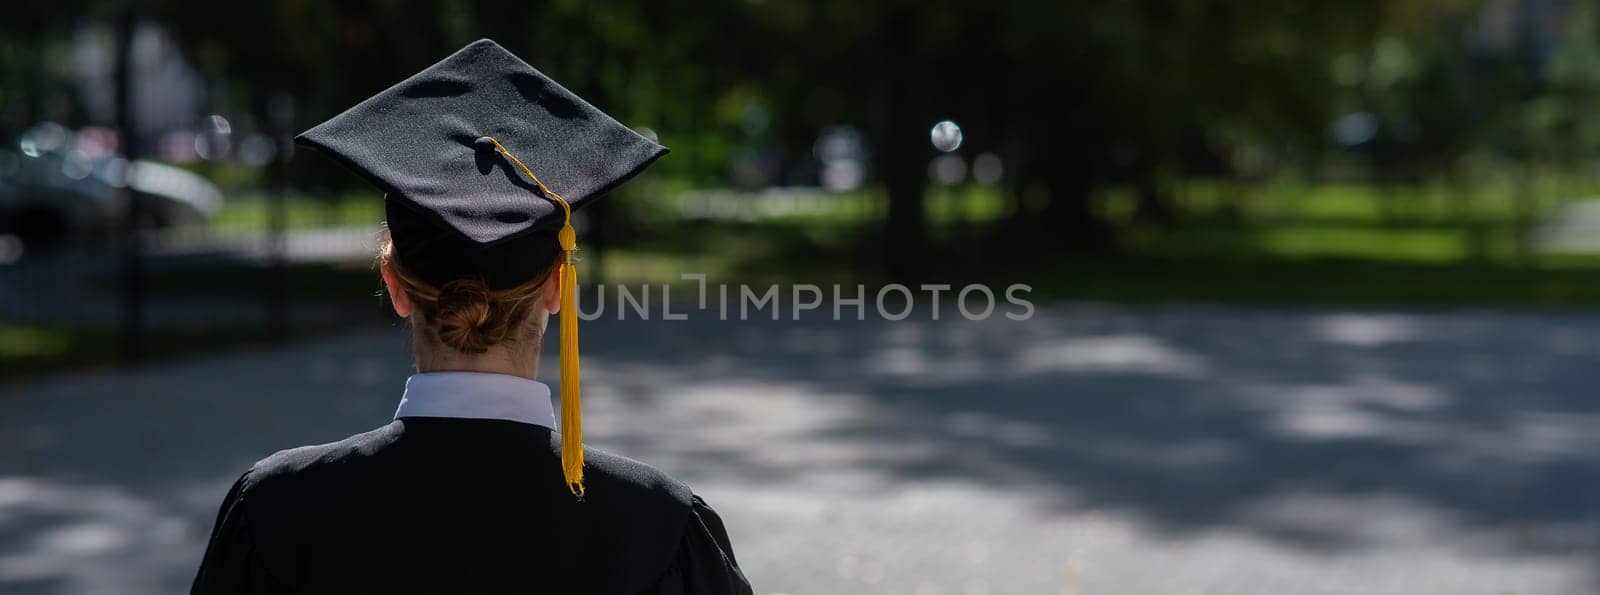 A woman throws her graduation cap against the blue sky. Widescreen. by mrwed54